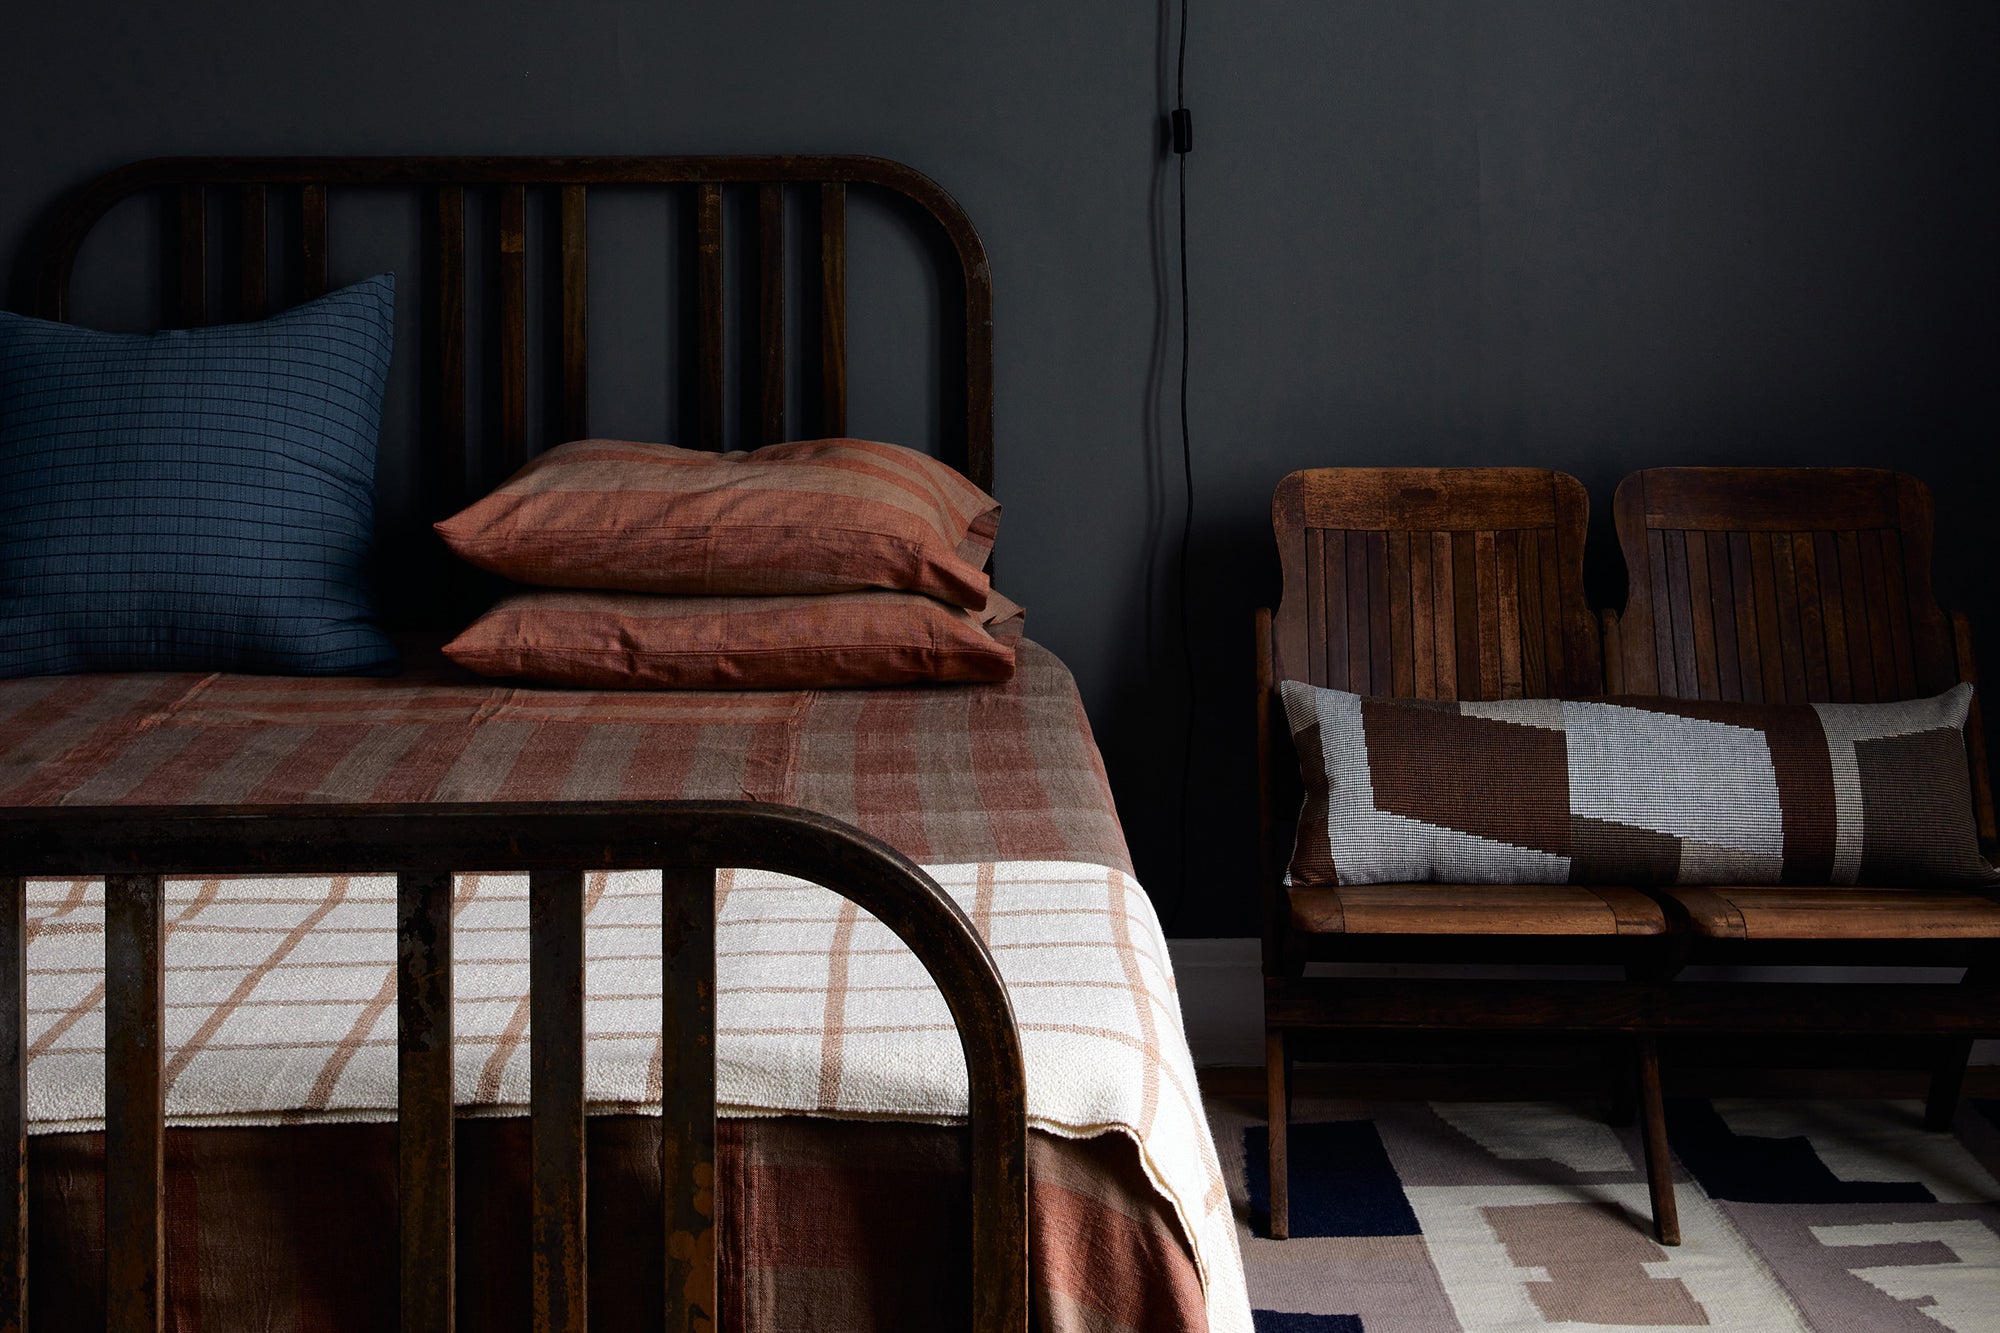 Bedroom with dark painted walls and ethically handwoven bedding, blankets, and rugs by MINNA. Rust, Navy, Camel, Neutral